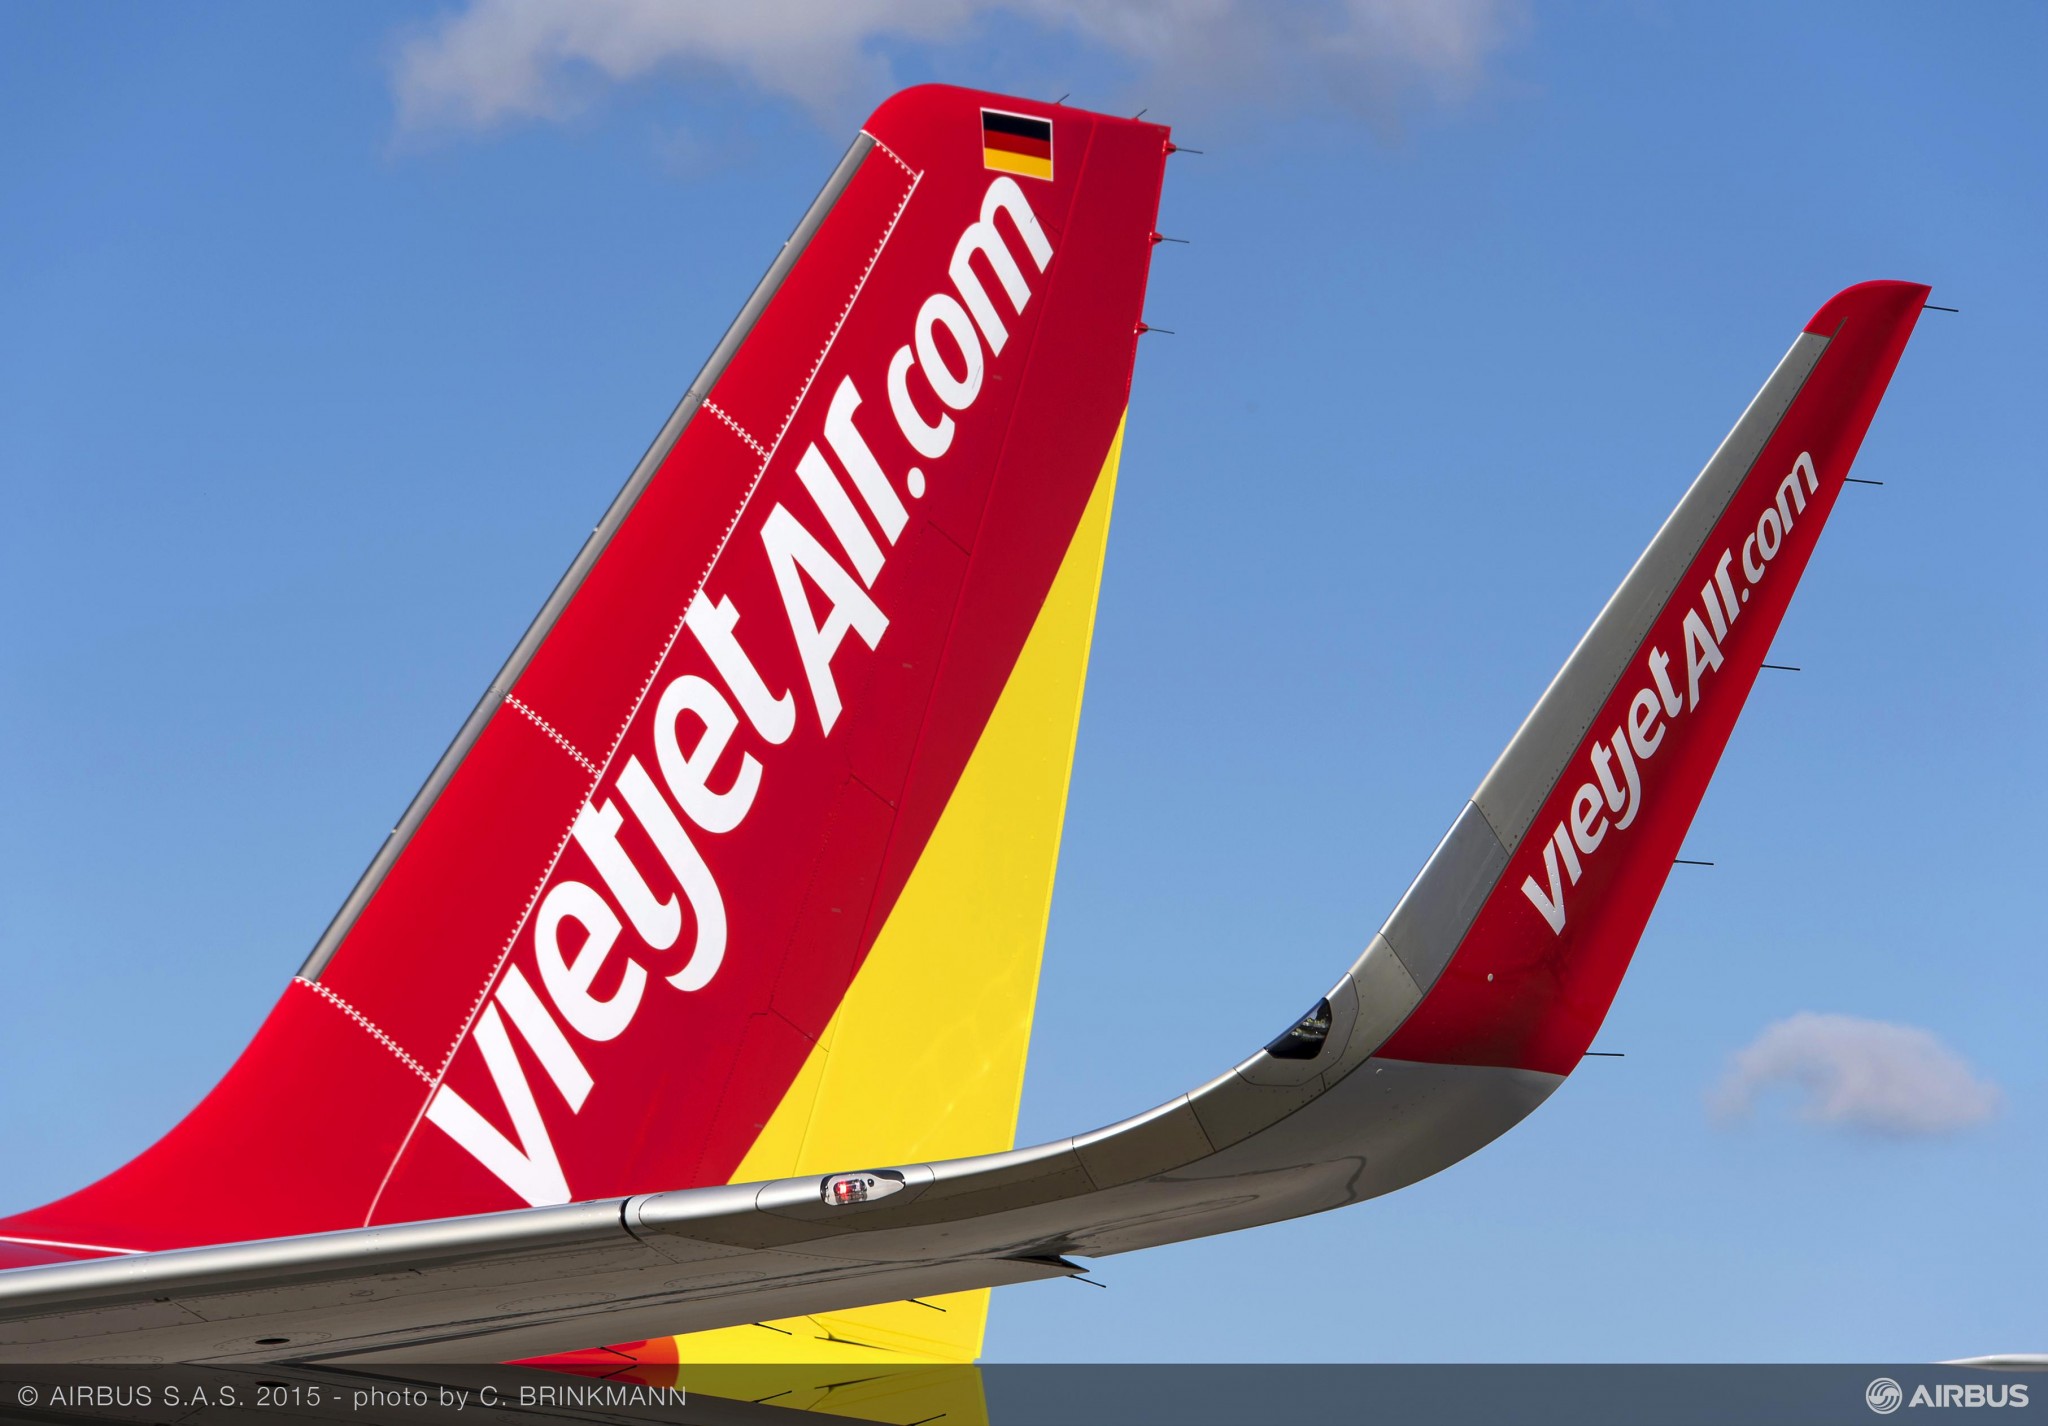 Vietjet Receives IATA Membership Certificate and Investment Approval to Establish Vietjet Center of Aviation Technology